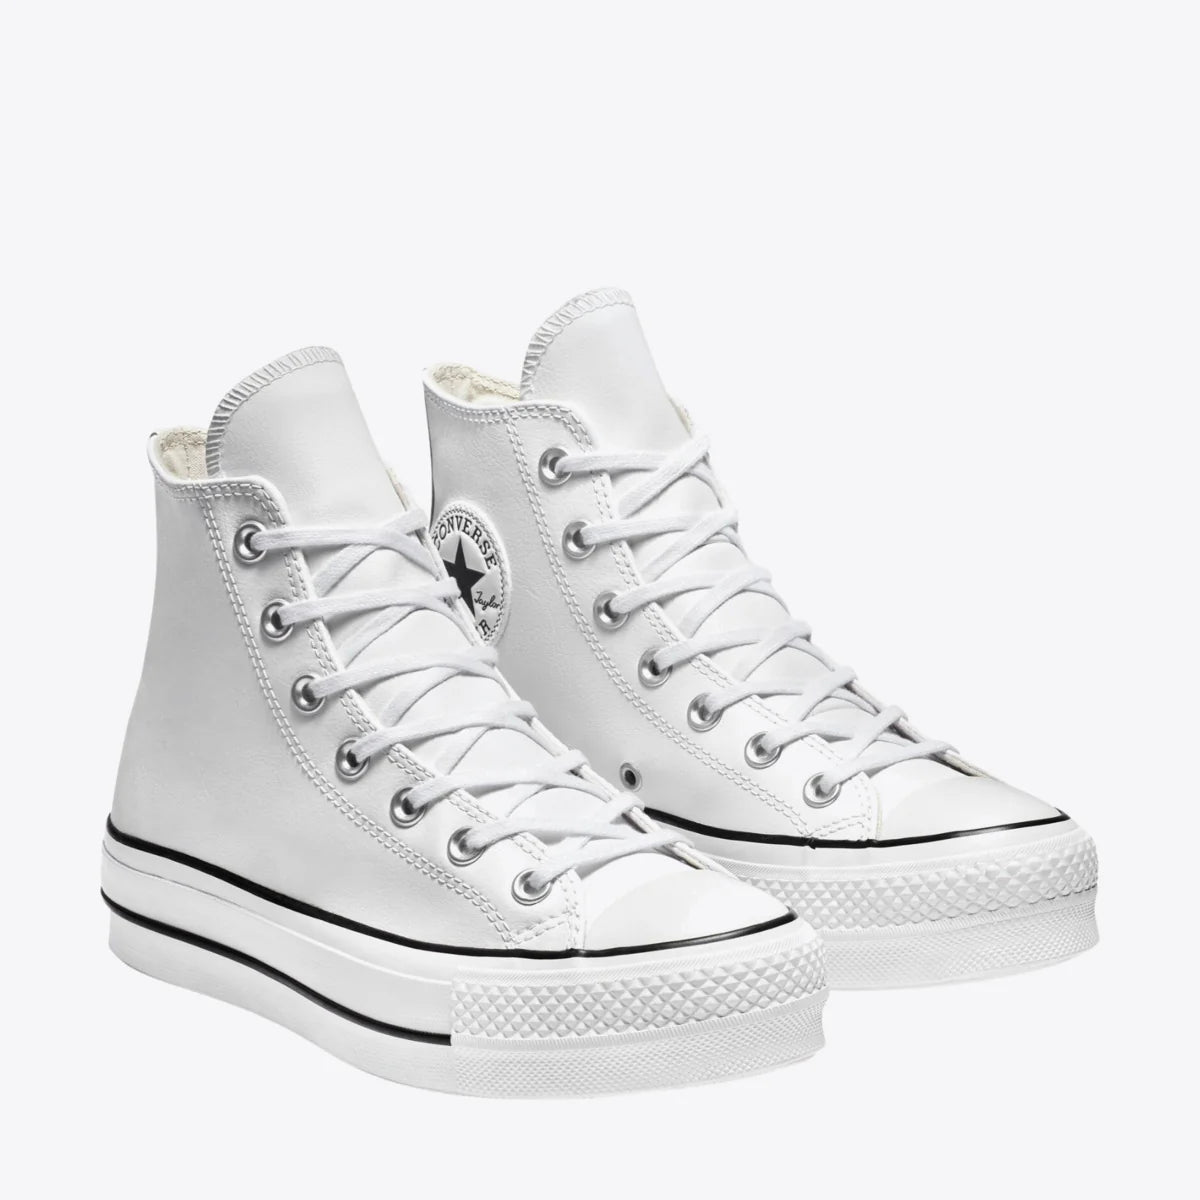 .CONVERSE CHUCK TAYLOR ALL STAR LIFT WHITE LEATHER HIGH TOP - (561676C)- LBW - R1L7